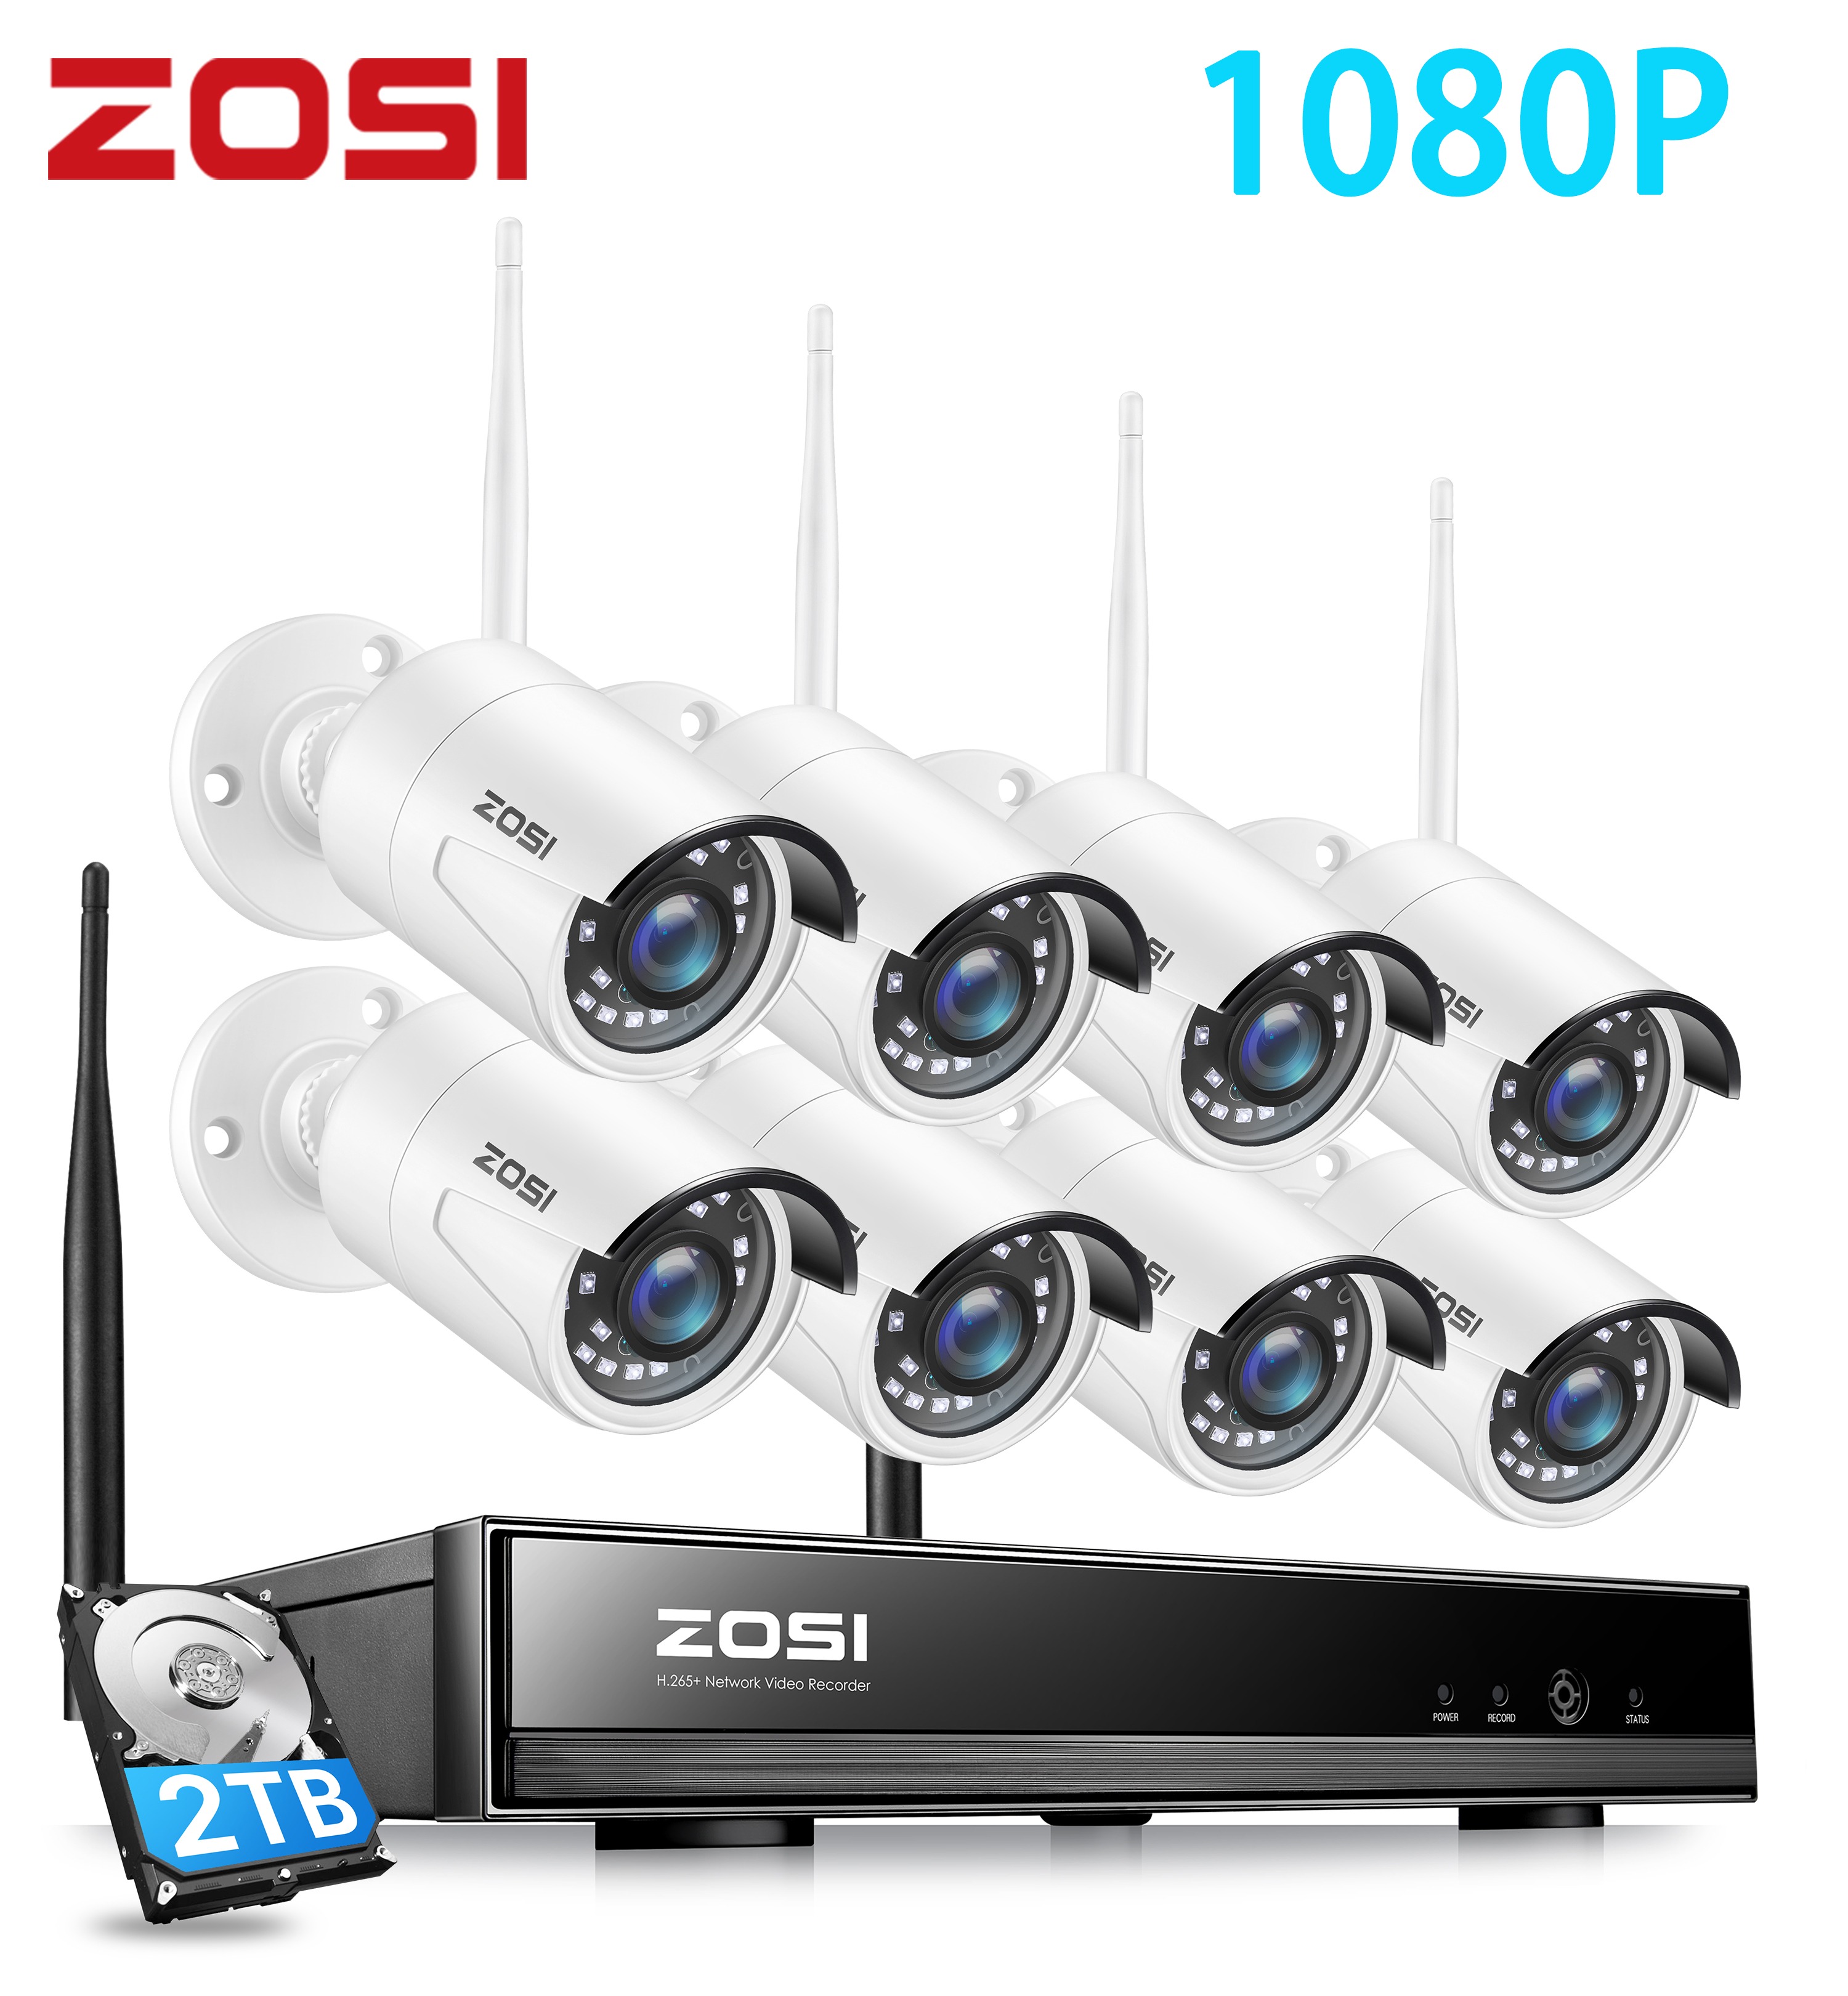 NVR ZOSI 1080P H.265+ Wireless Security Cameras System Outdoor Indoor with Night Vision No Hard Drive Included 8CH Network Video Recorder with 4 x 2MP Auto Match IP Cameras Renewed 